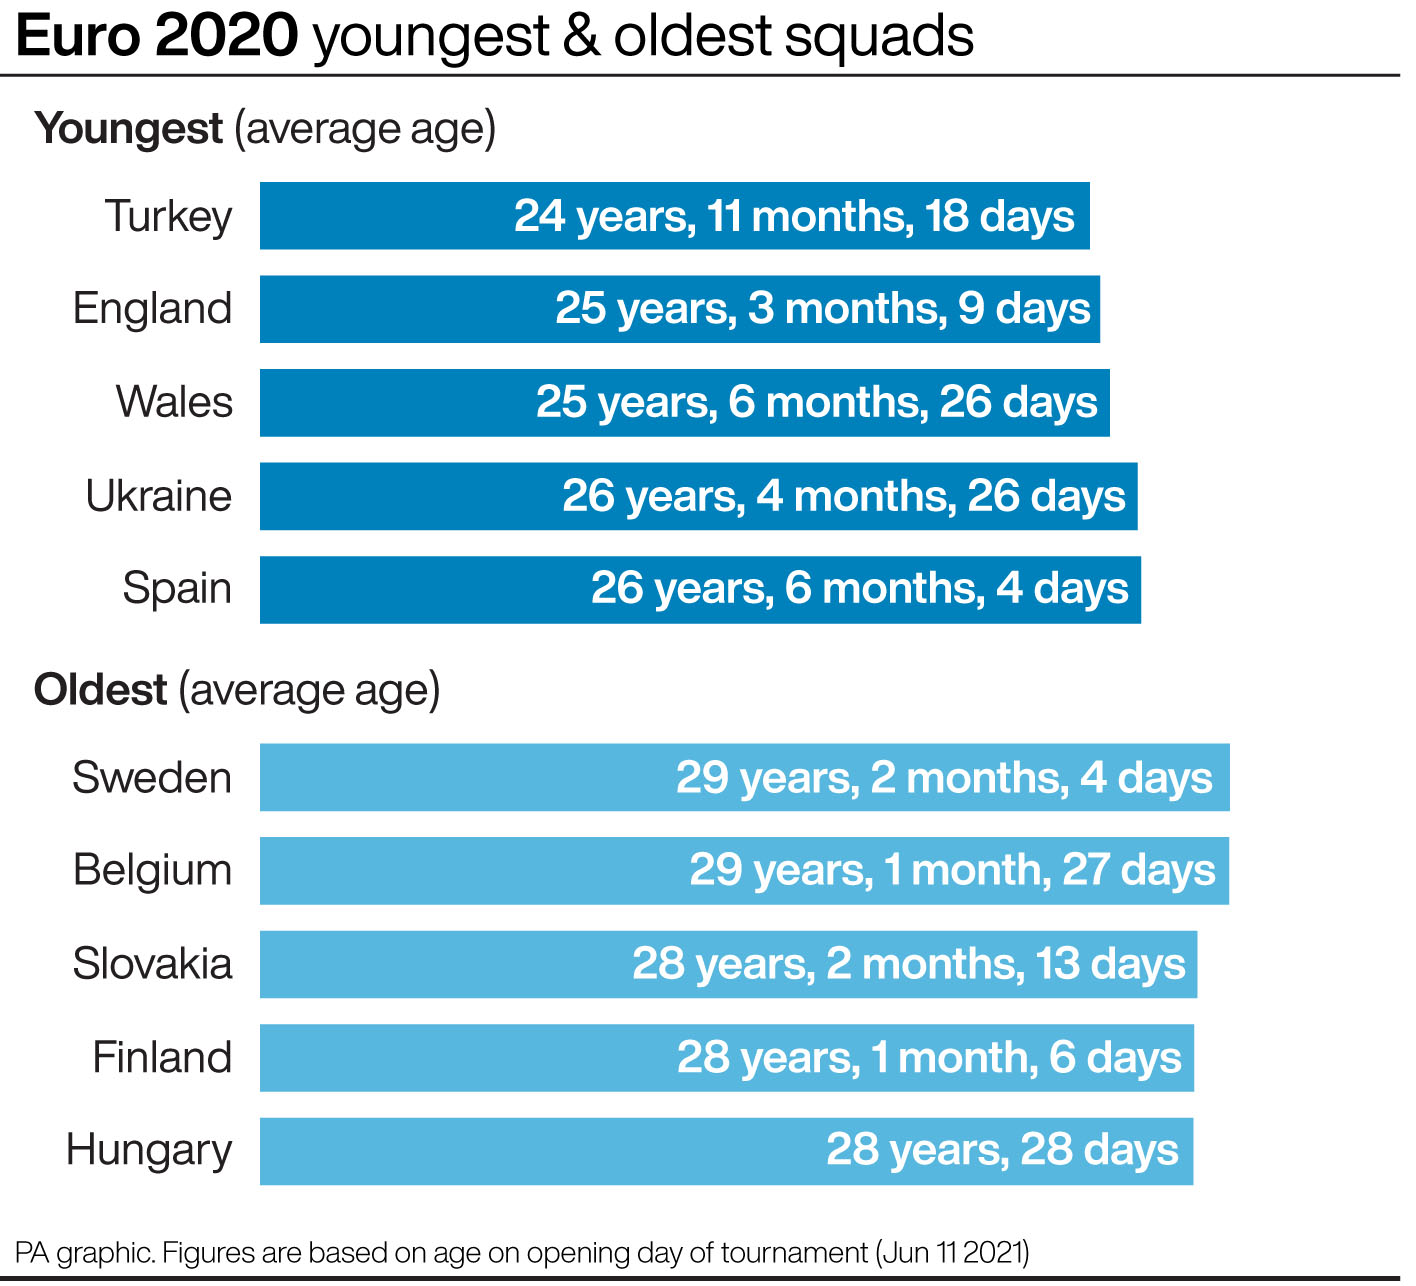 Euro 2020 - youngest and oldest squads